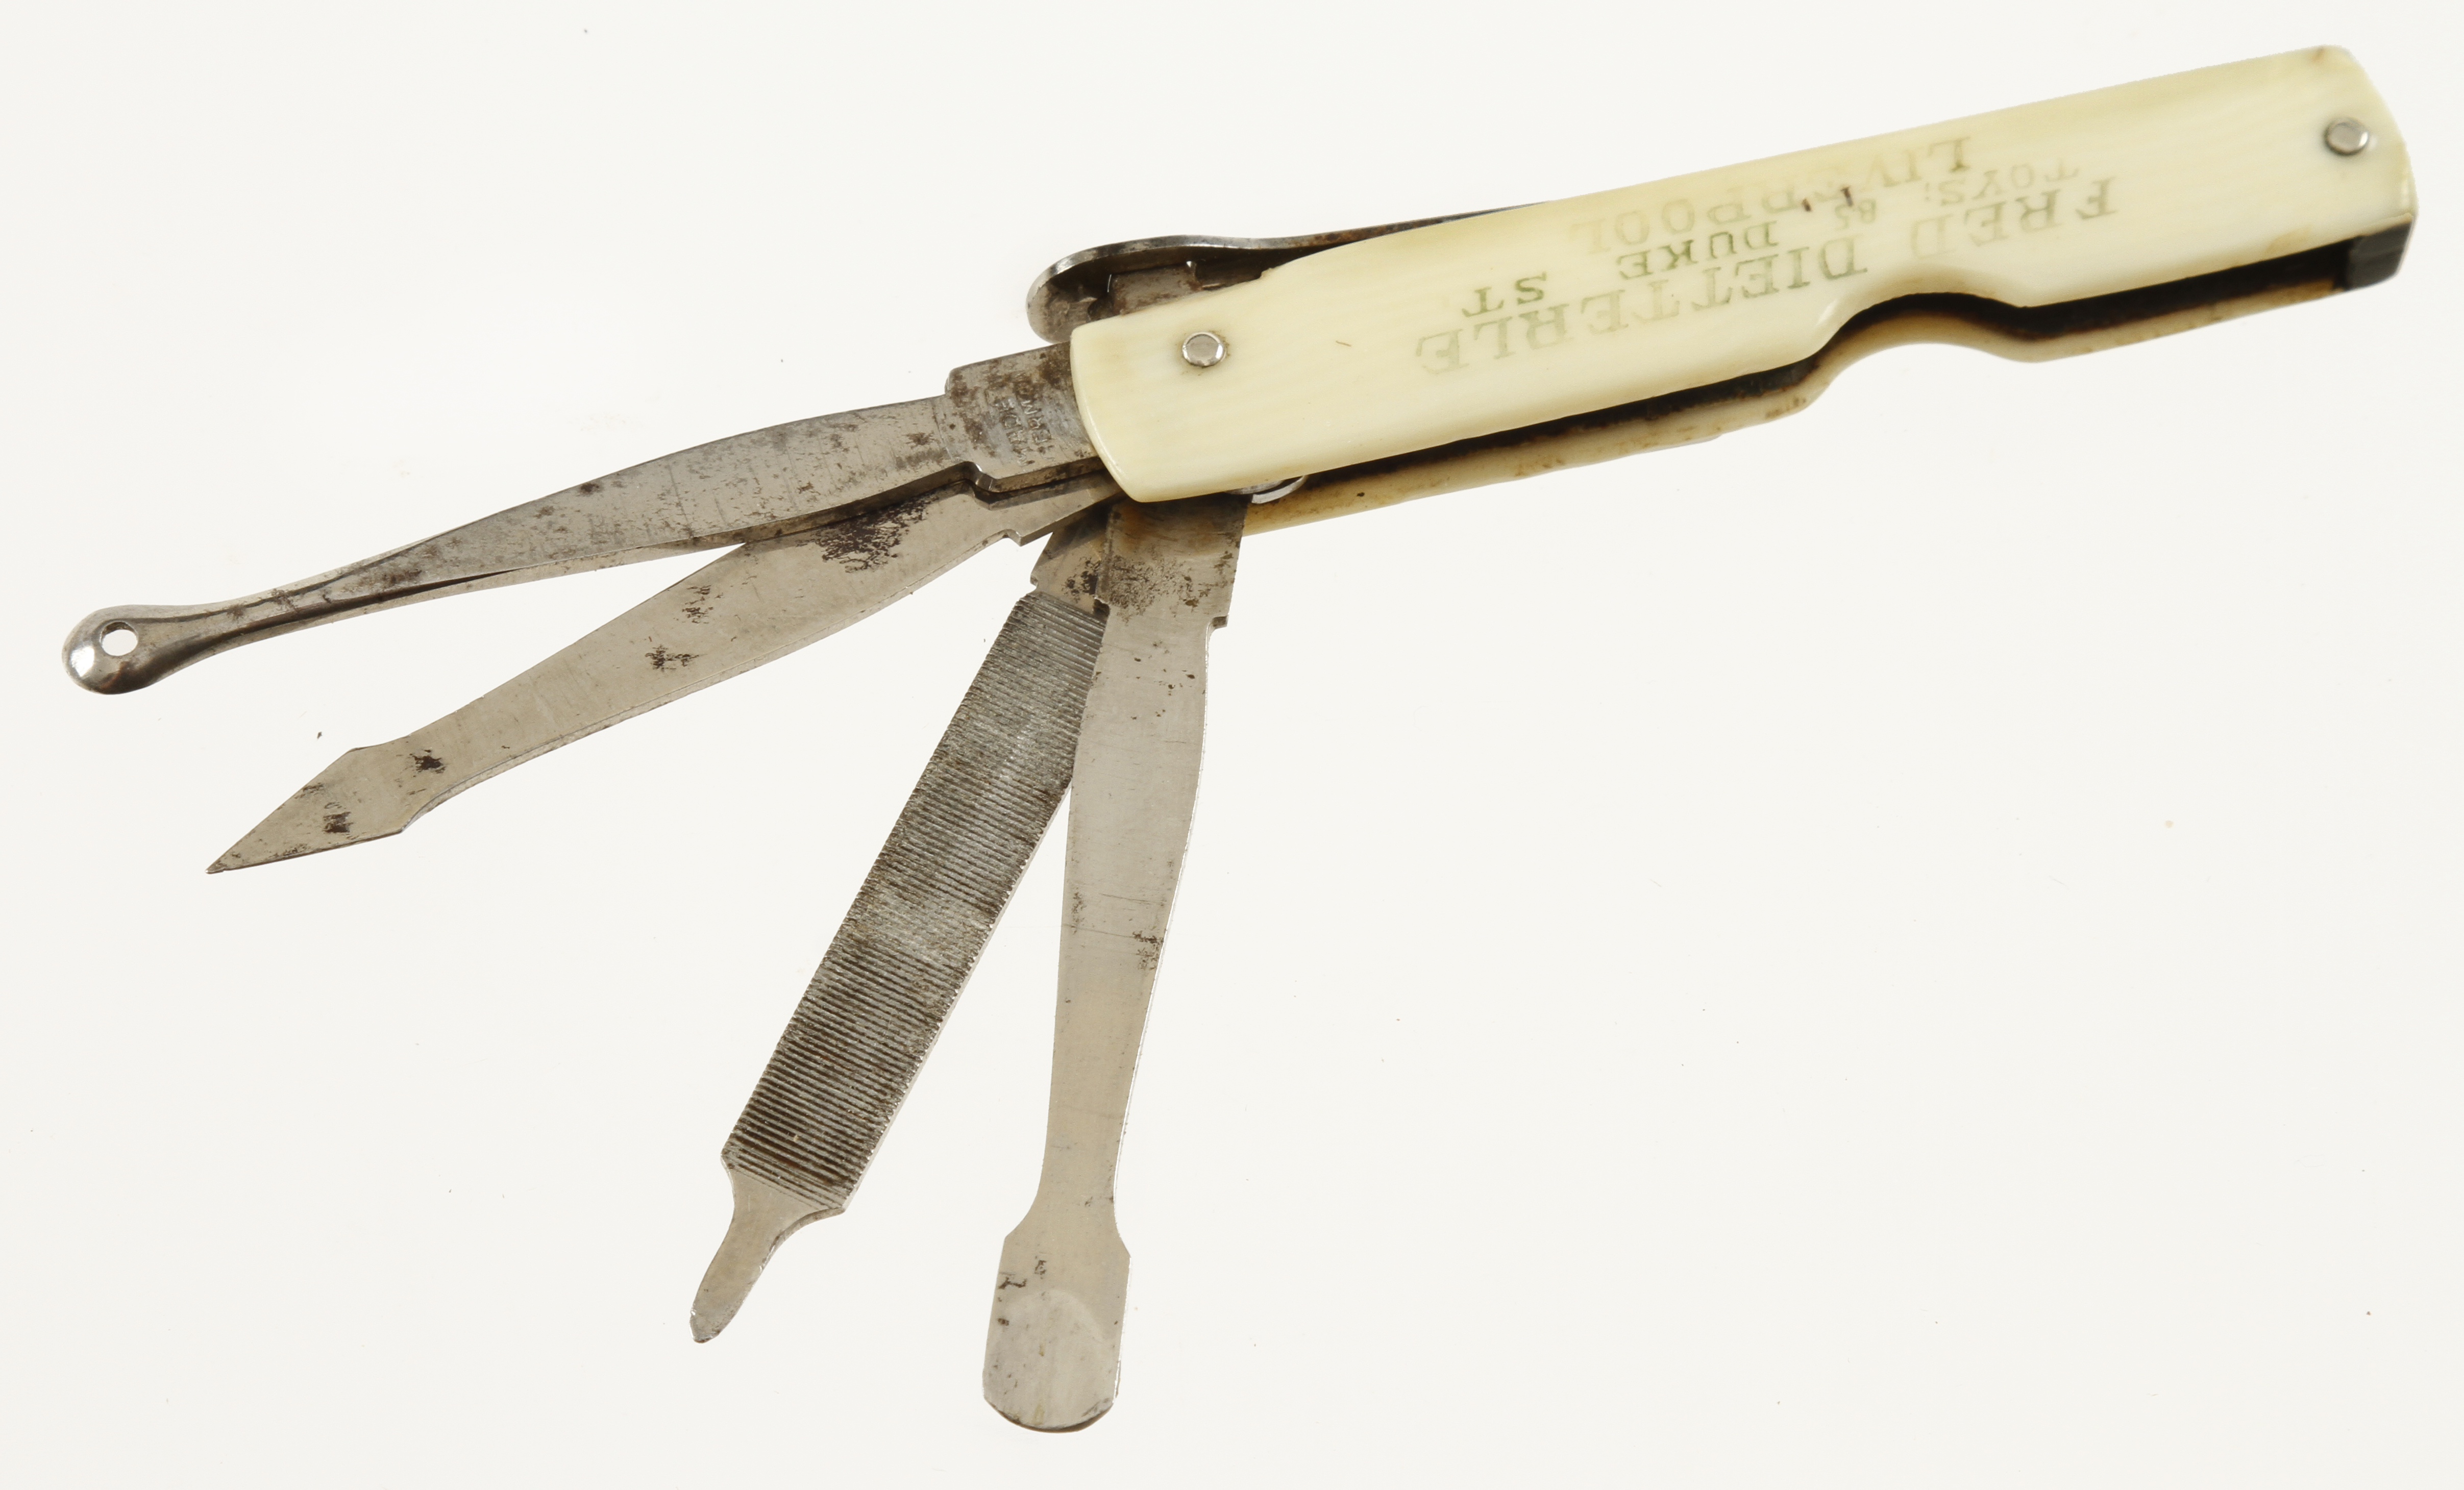 A unusual "personal hygiene" tool by Fred Dietterle Liverpool with 4 folding implements ie nail